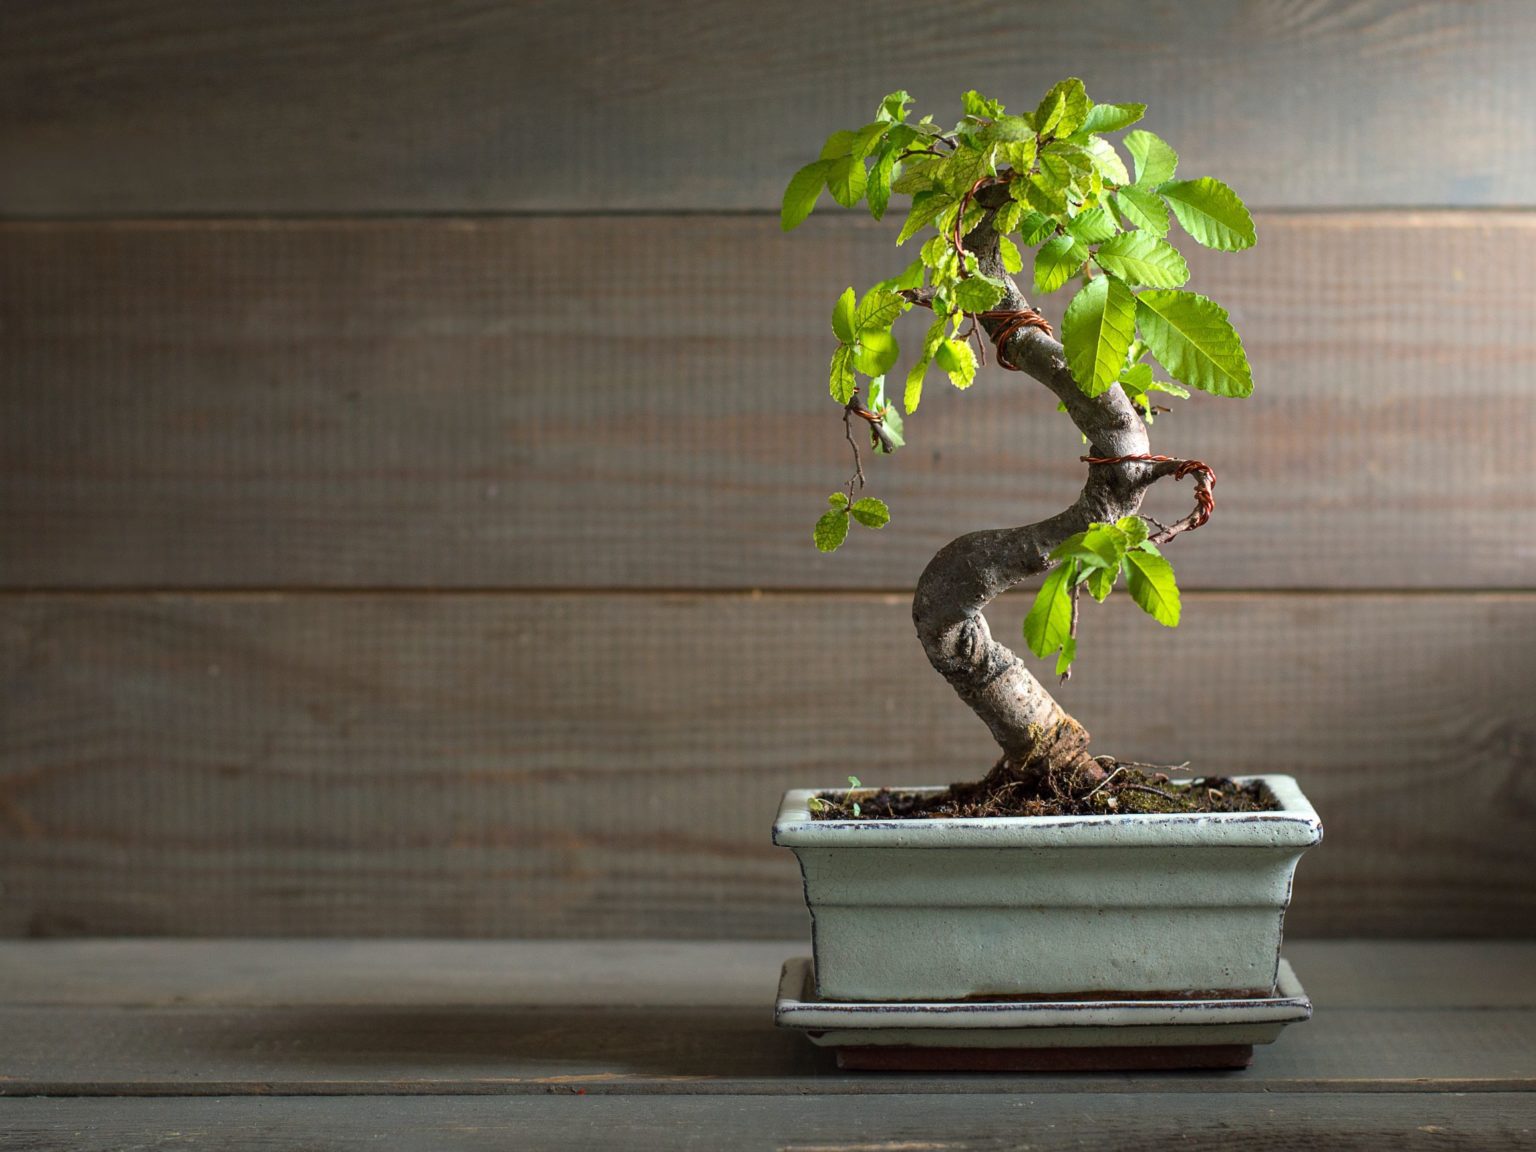 Best How To Care For A Bonsai Tree Inside in the world Learn more here 